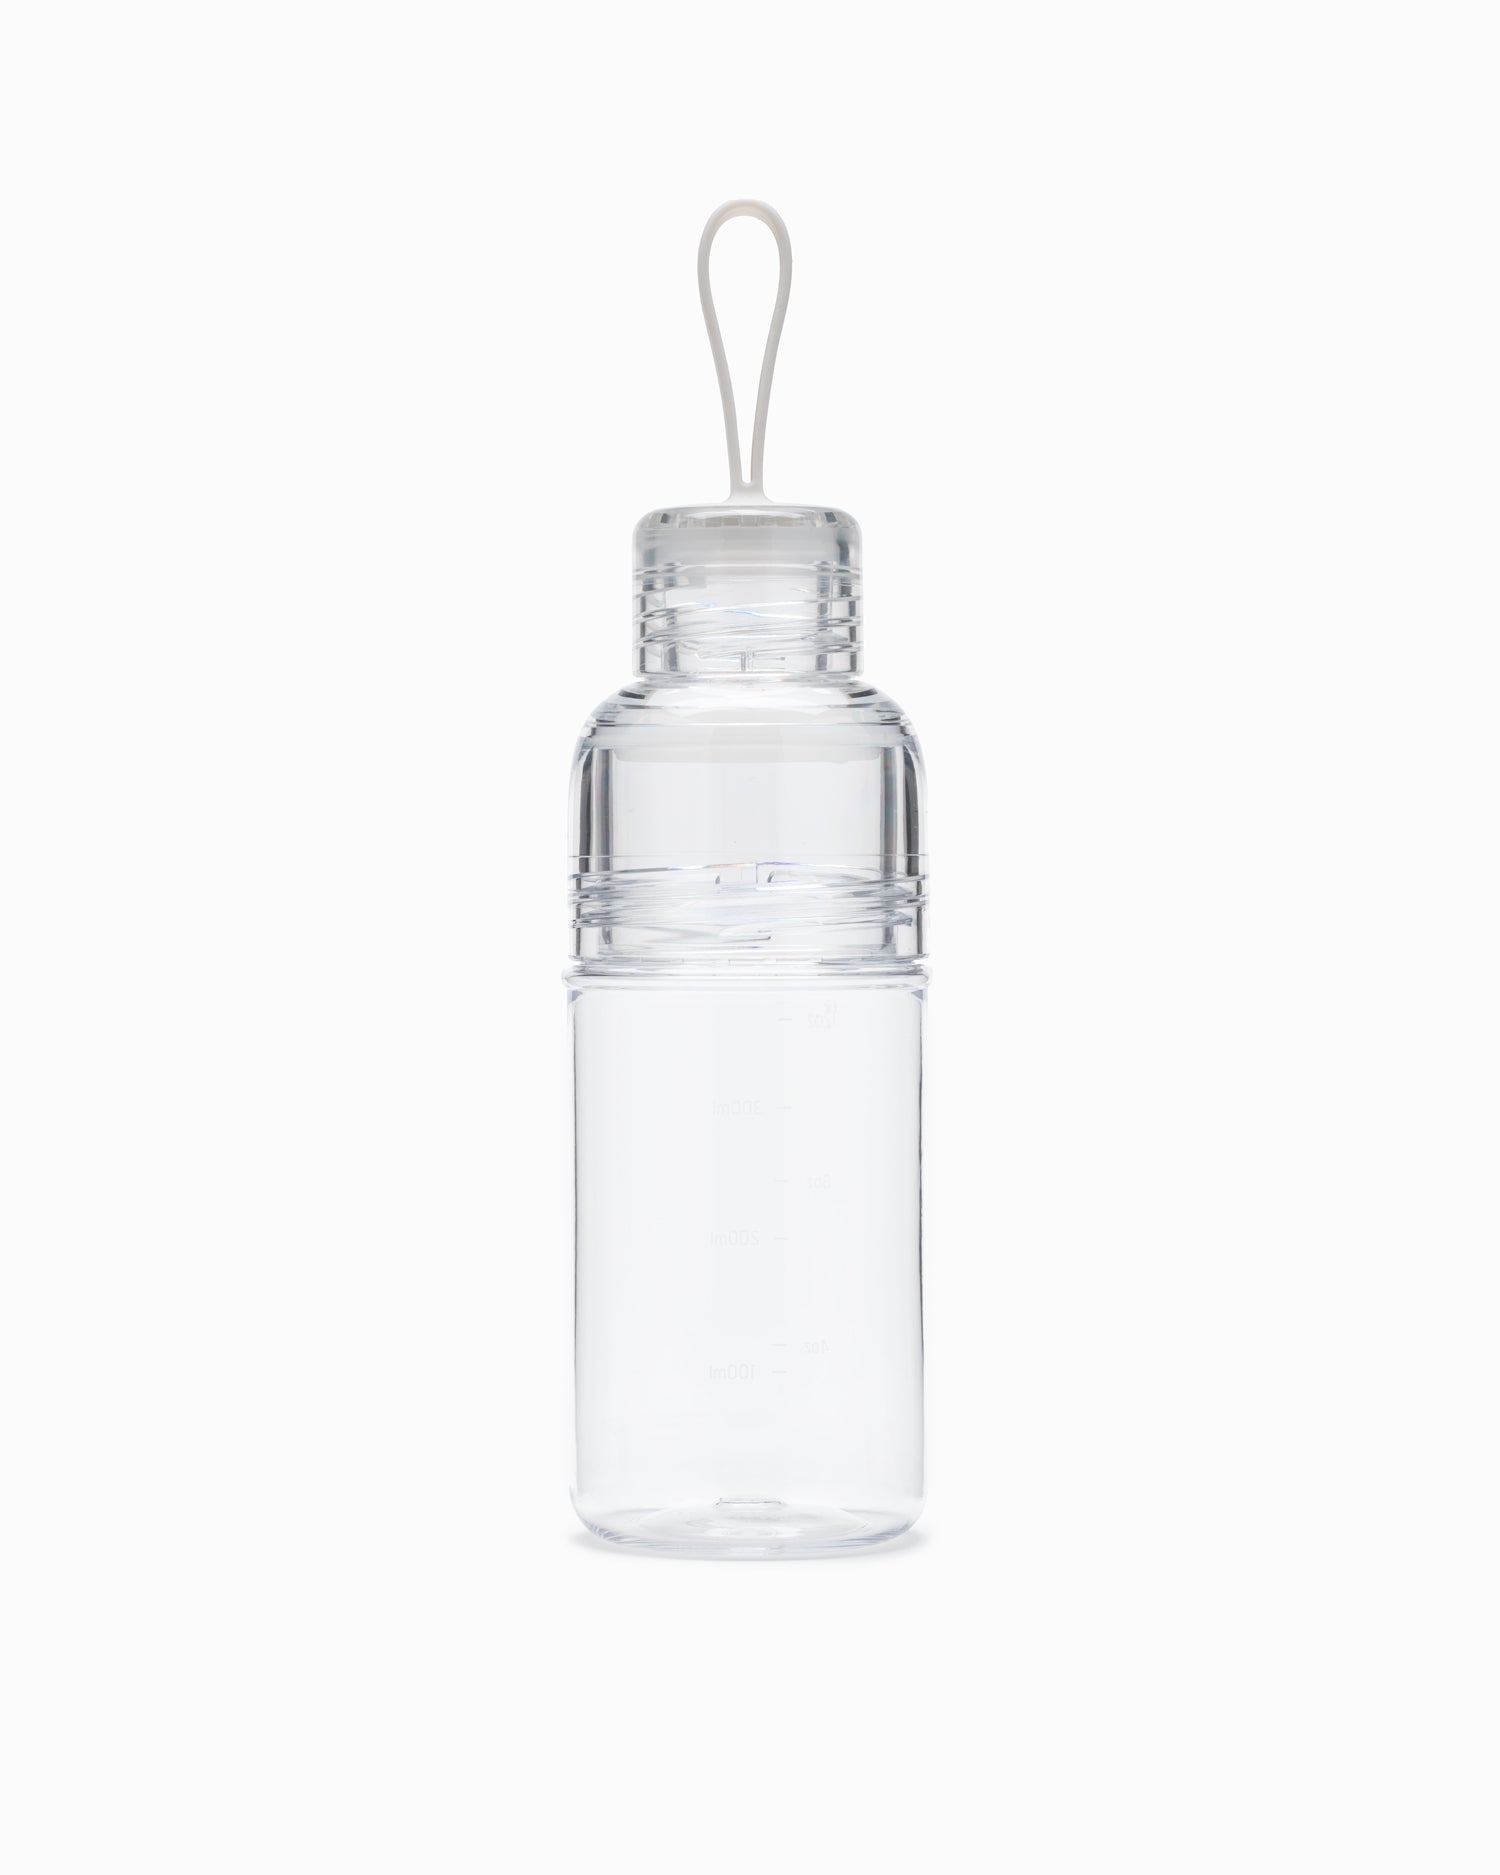 Kinto  Water Bottle – Late Morning